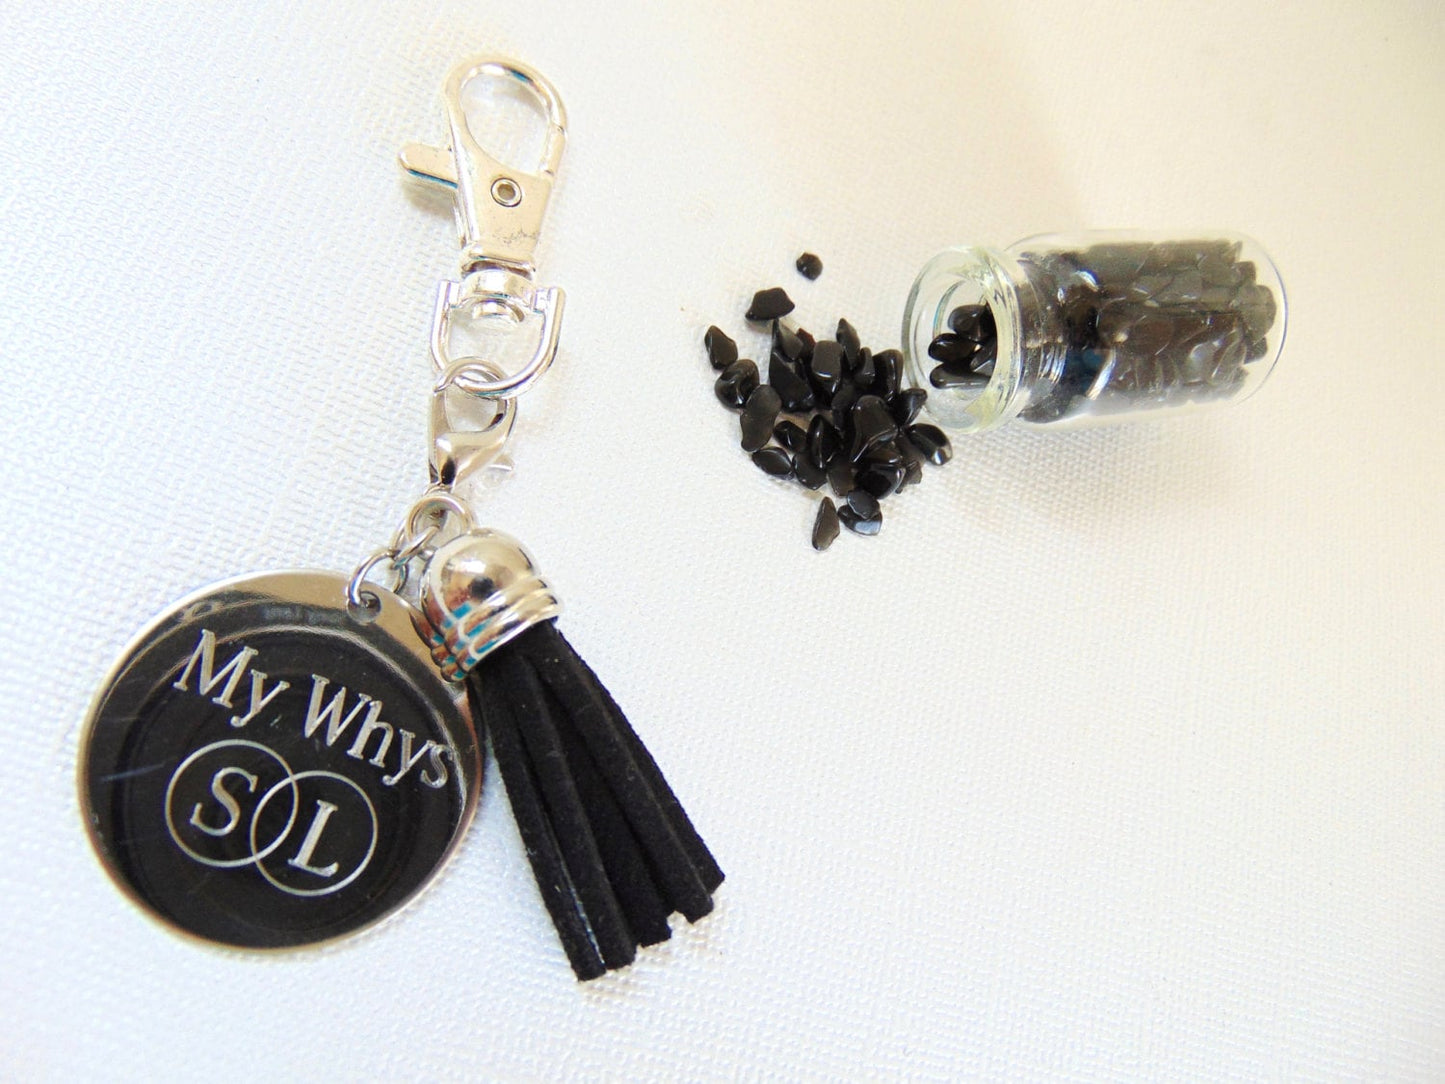 Personalized keychain, engraved Black & silver key chain, Custom message/Mini mantra keychain, inspirational quote disc tassel key holder